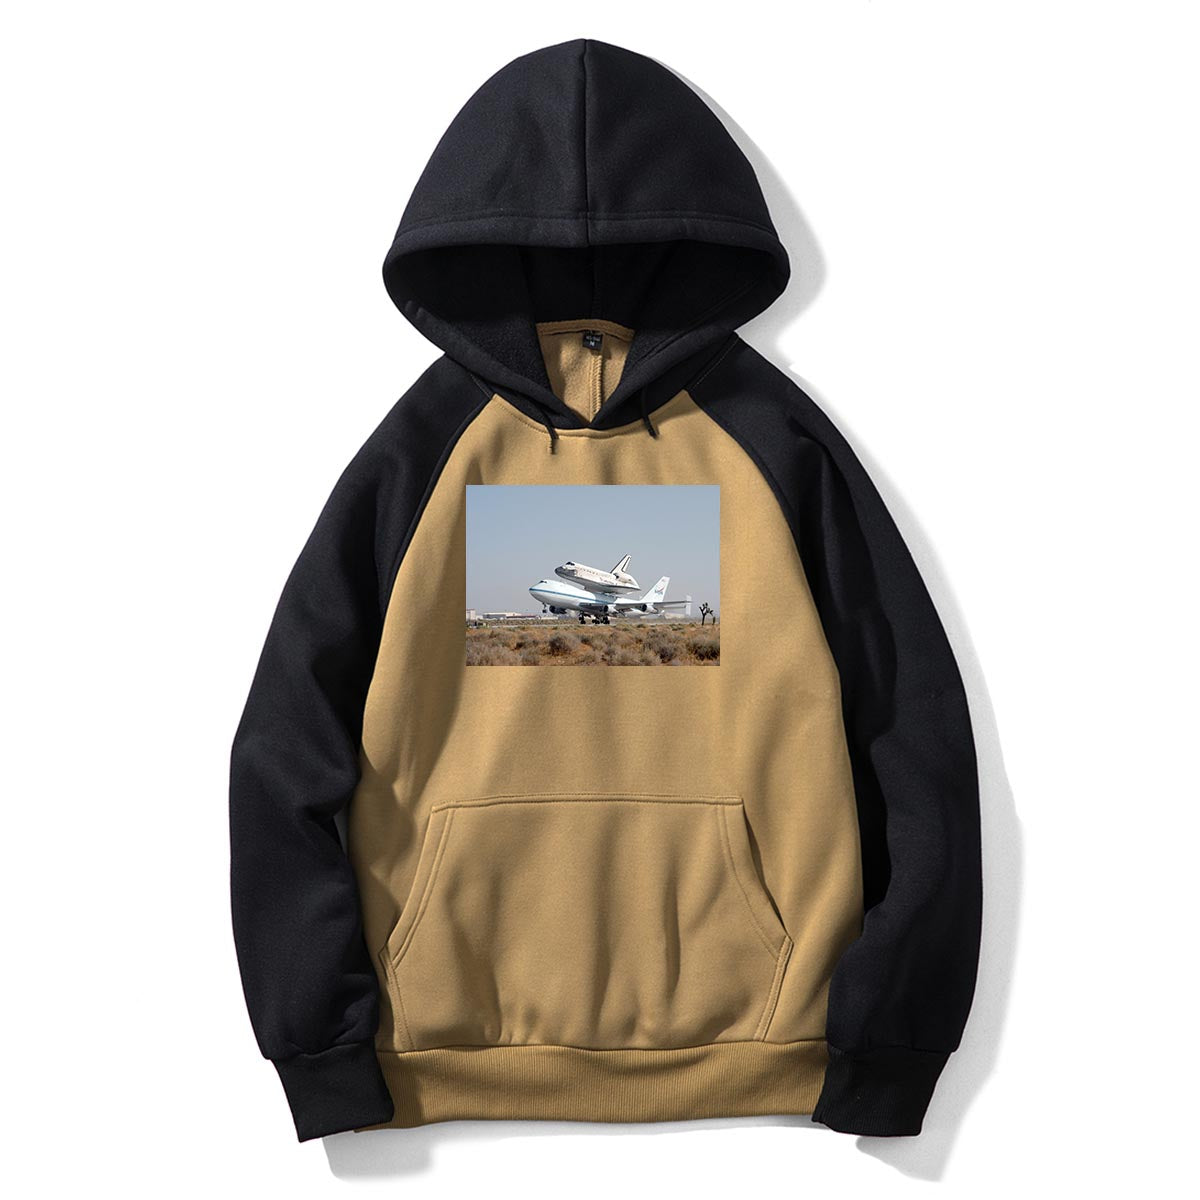 Boeing 747 Carrying Nasa's Space Shuttle Designed Colourful Hoodies